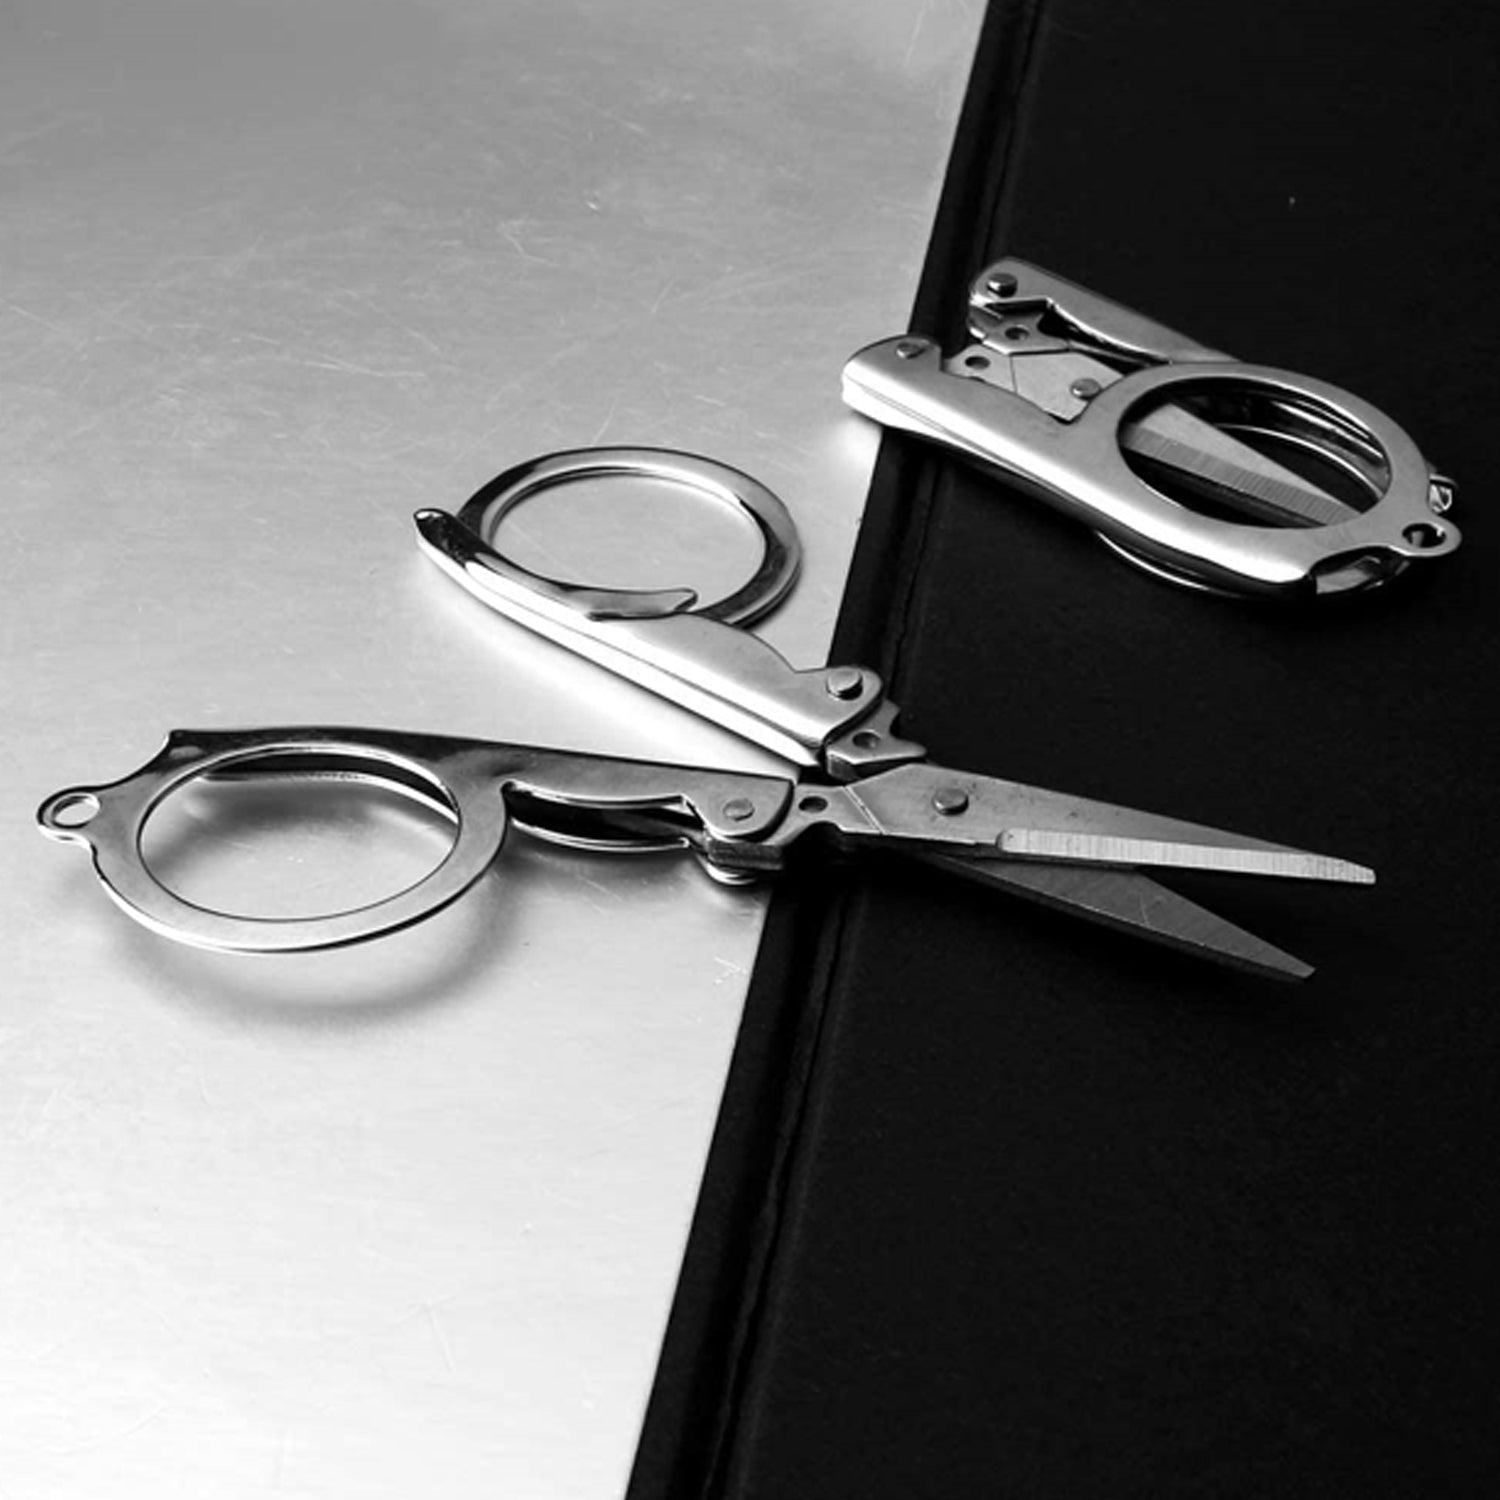 1784 Folding Scissor 3.5inch used in crafting and cutting purposes for children’s and adults.